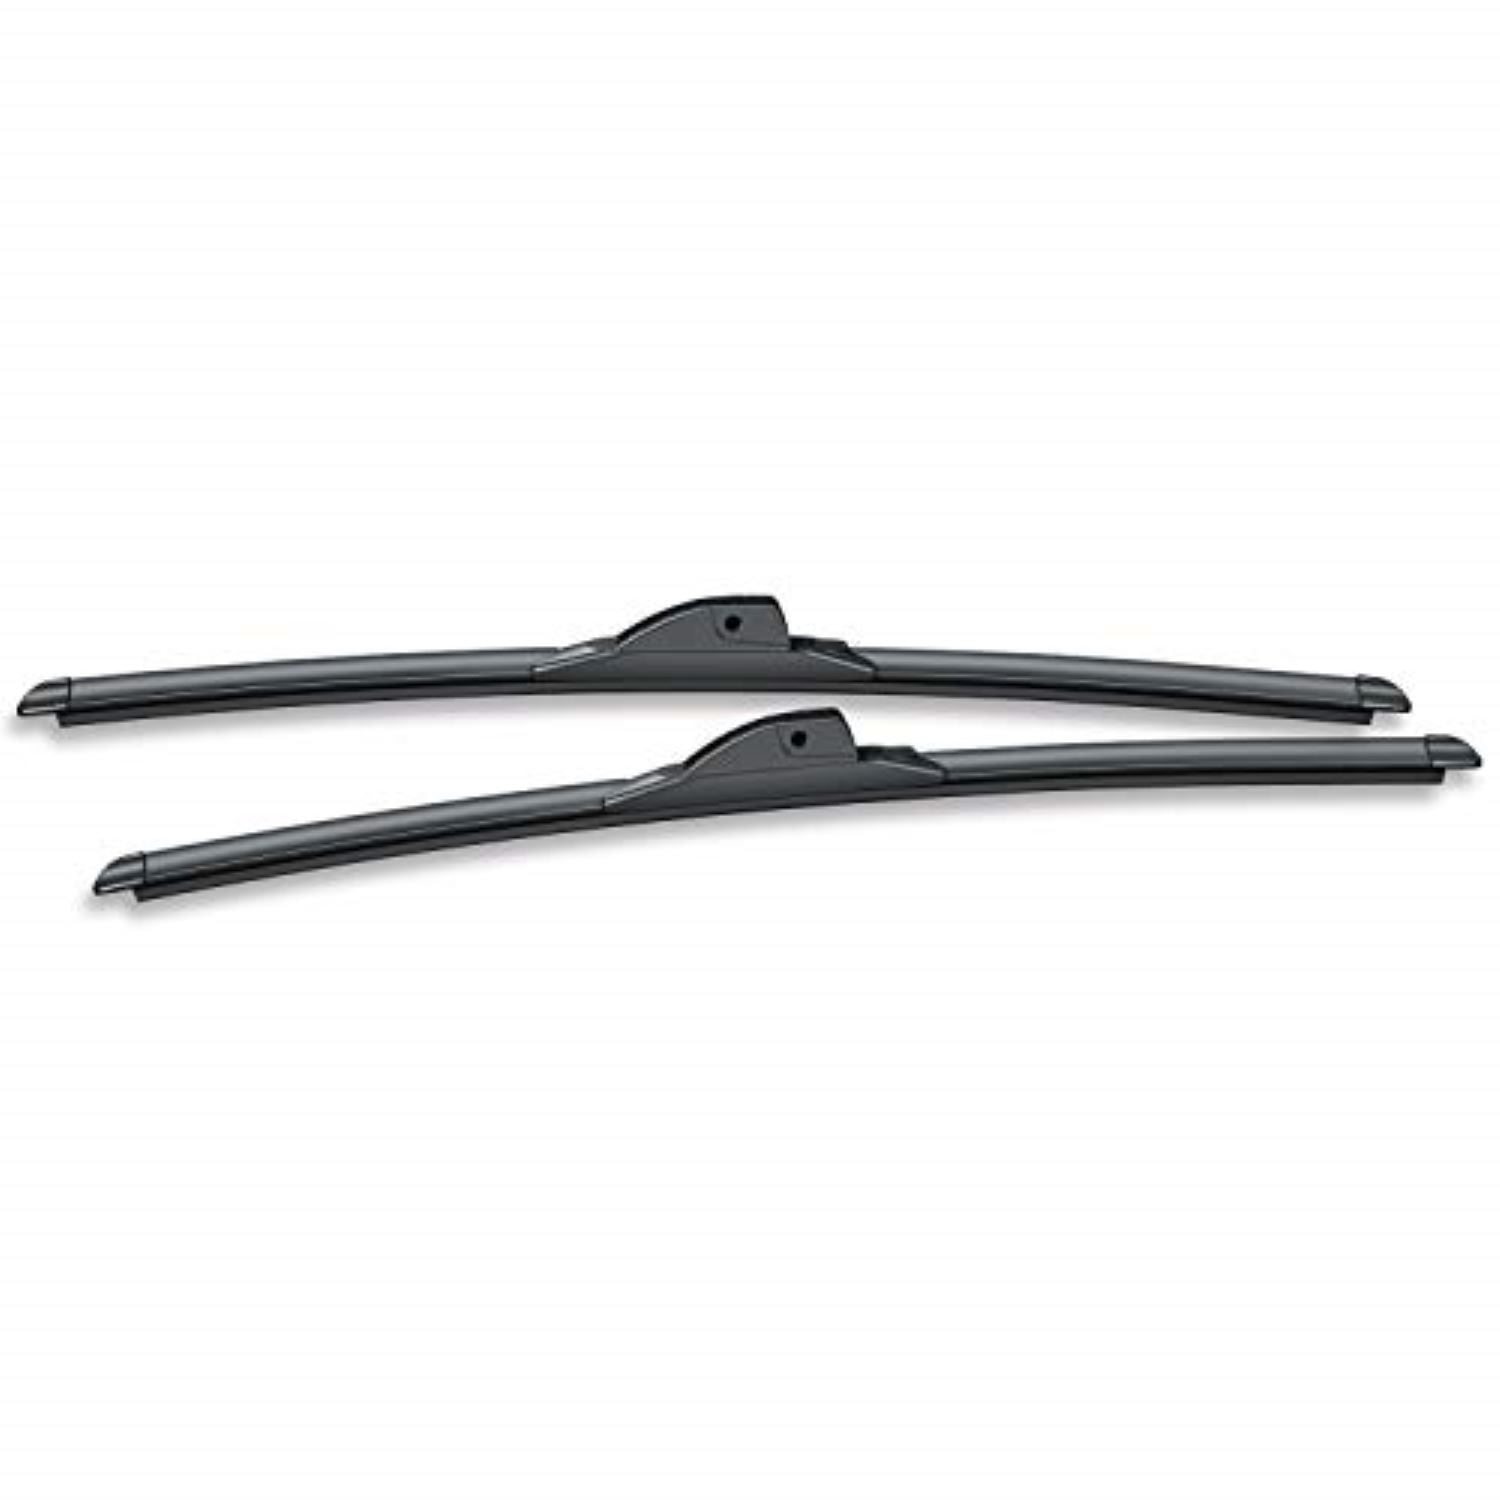 Sameday Post TRICO Wiper Blades 22"/22" HOOK FITTING Great Upgrade PAIR 